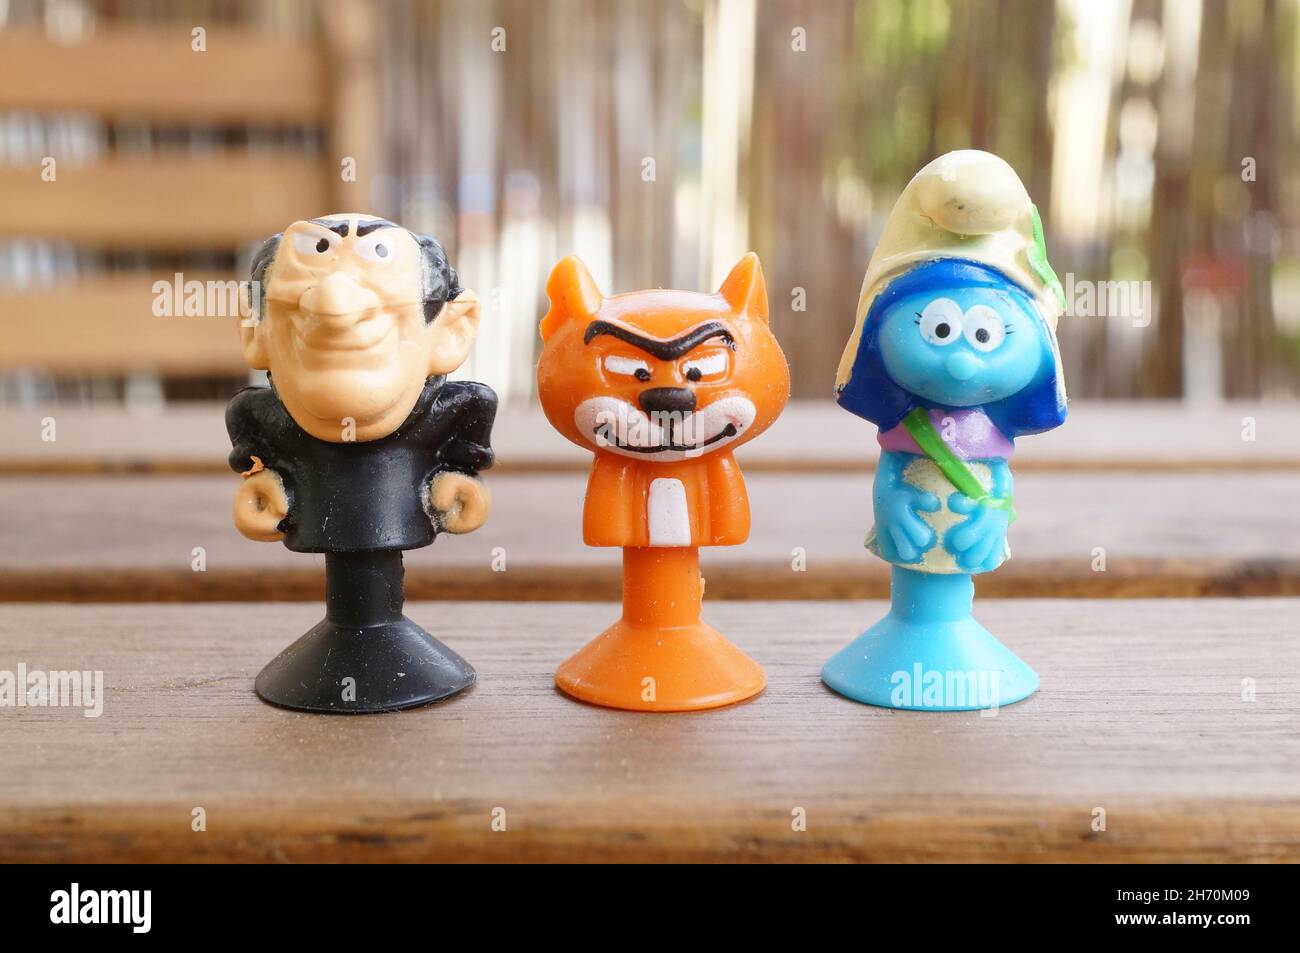 POZNAN, POLAND - May 14, 2017: A closeup shot of Gargamel, Asrael, and female Smurf toy figurines on a wooden table Stock Photo